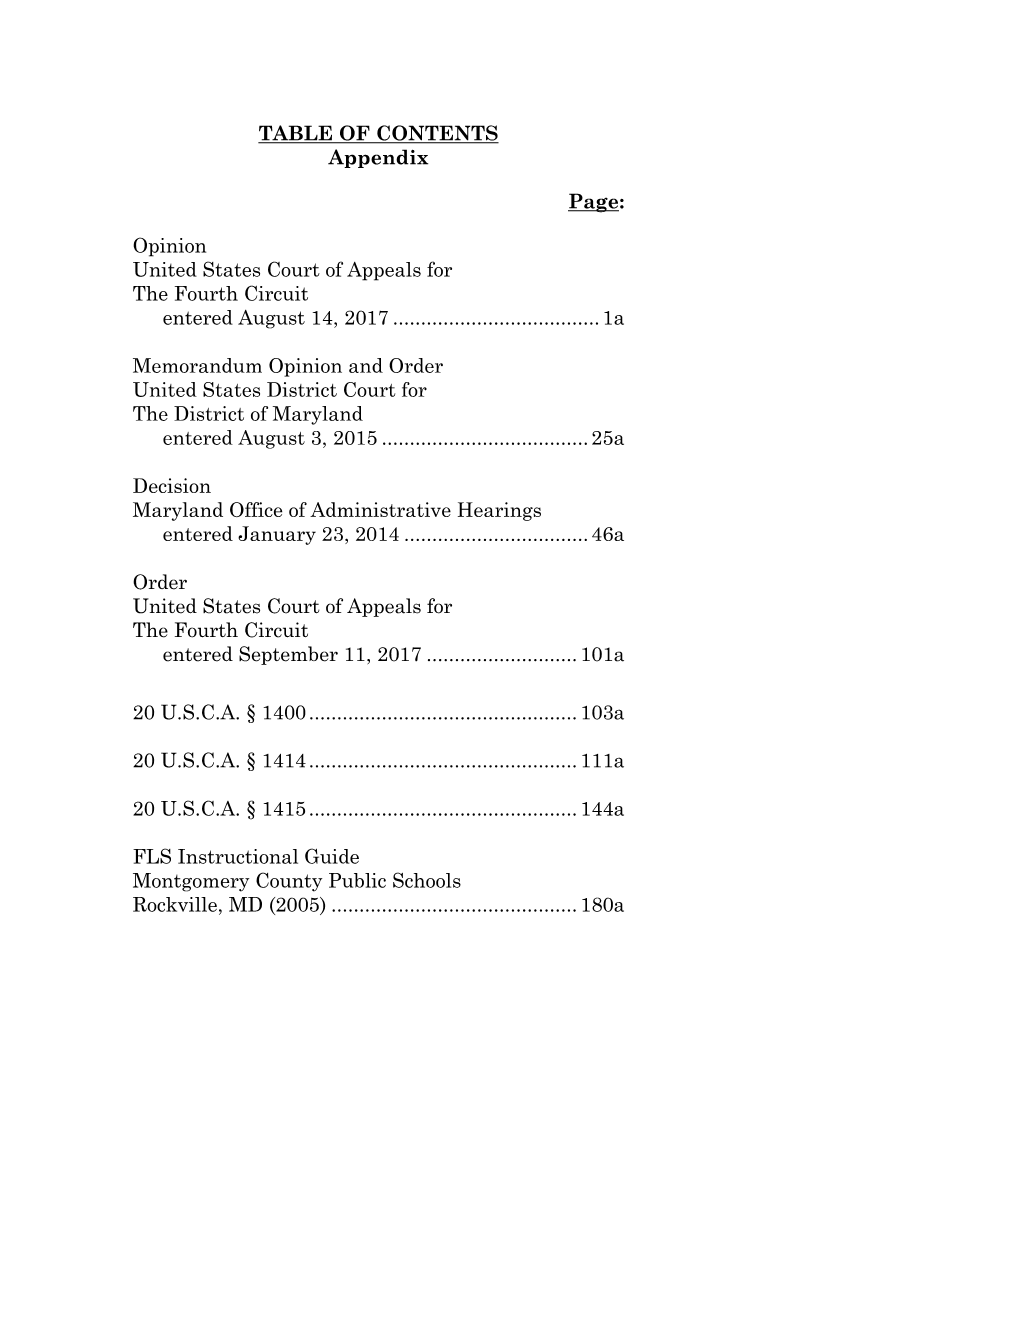 TABLE of CONTENTS Appendix Page: Opinion United States Court